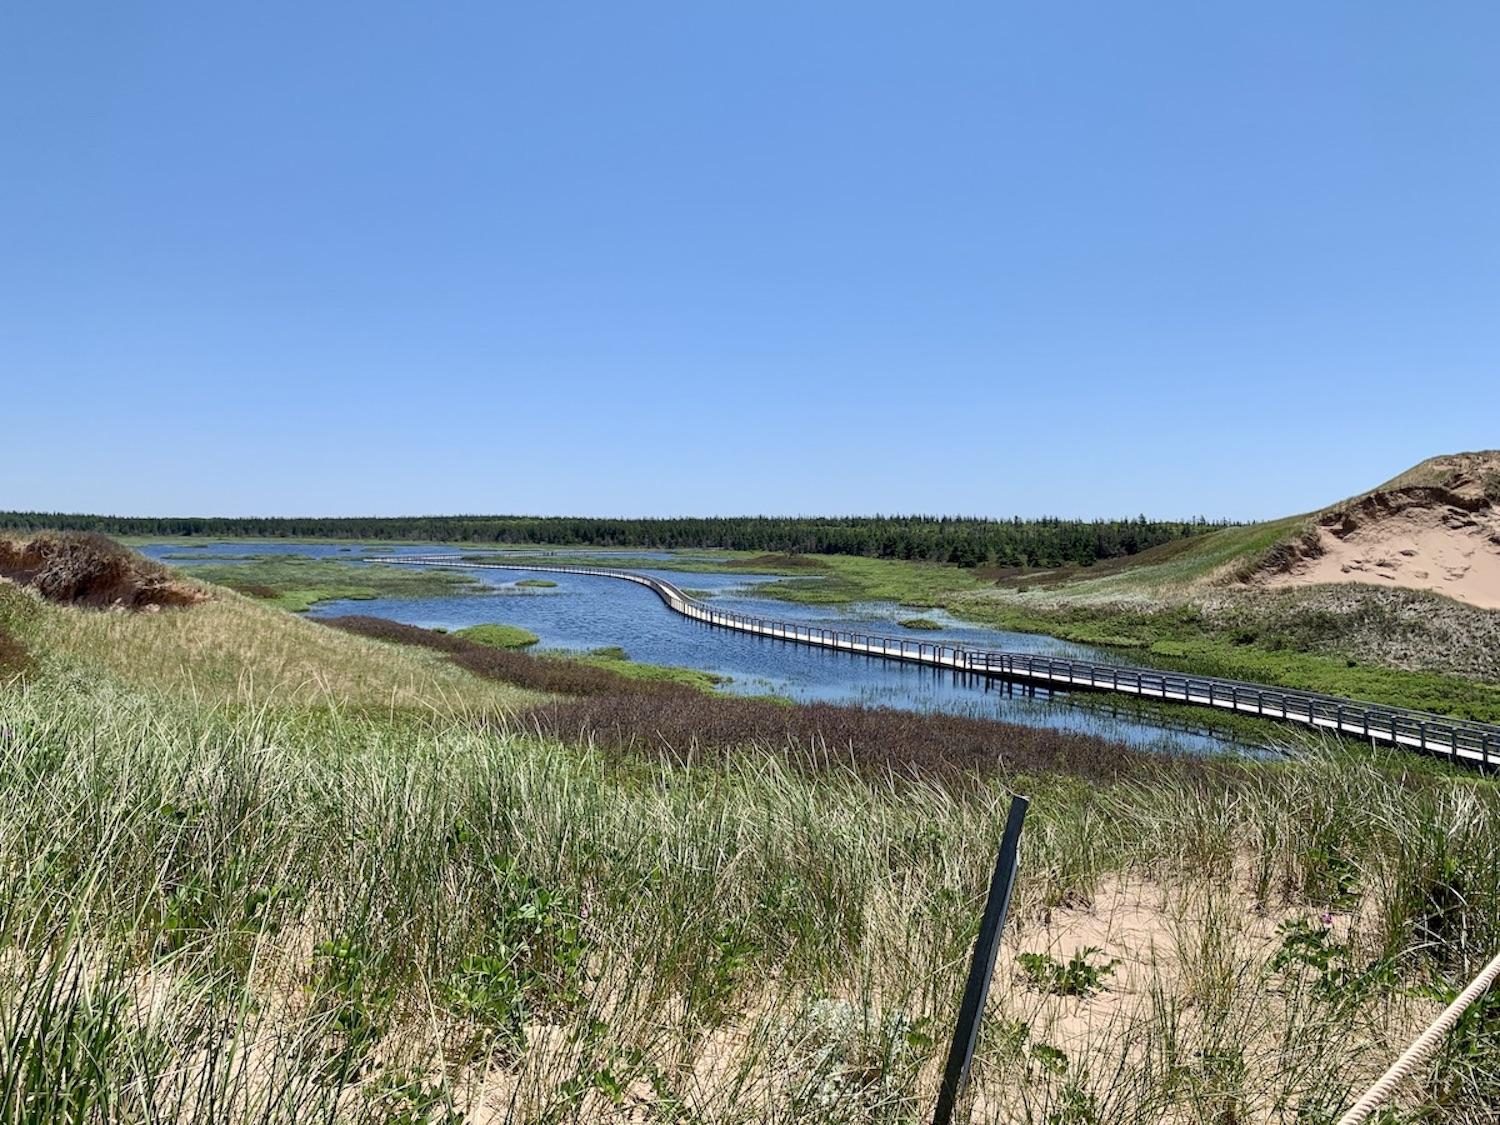 A view of the floating boardwalk on the Greenwich Dunes Trail.